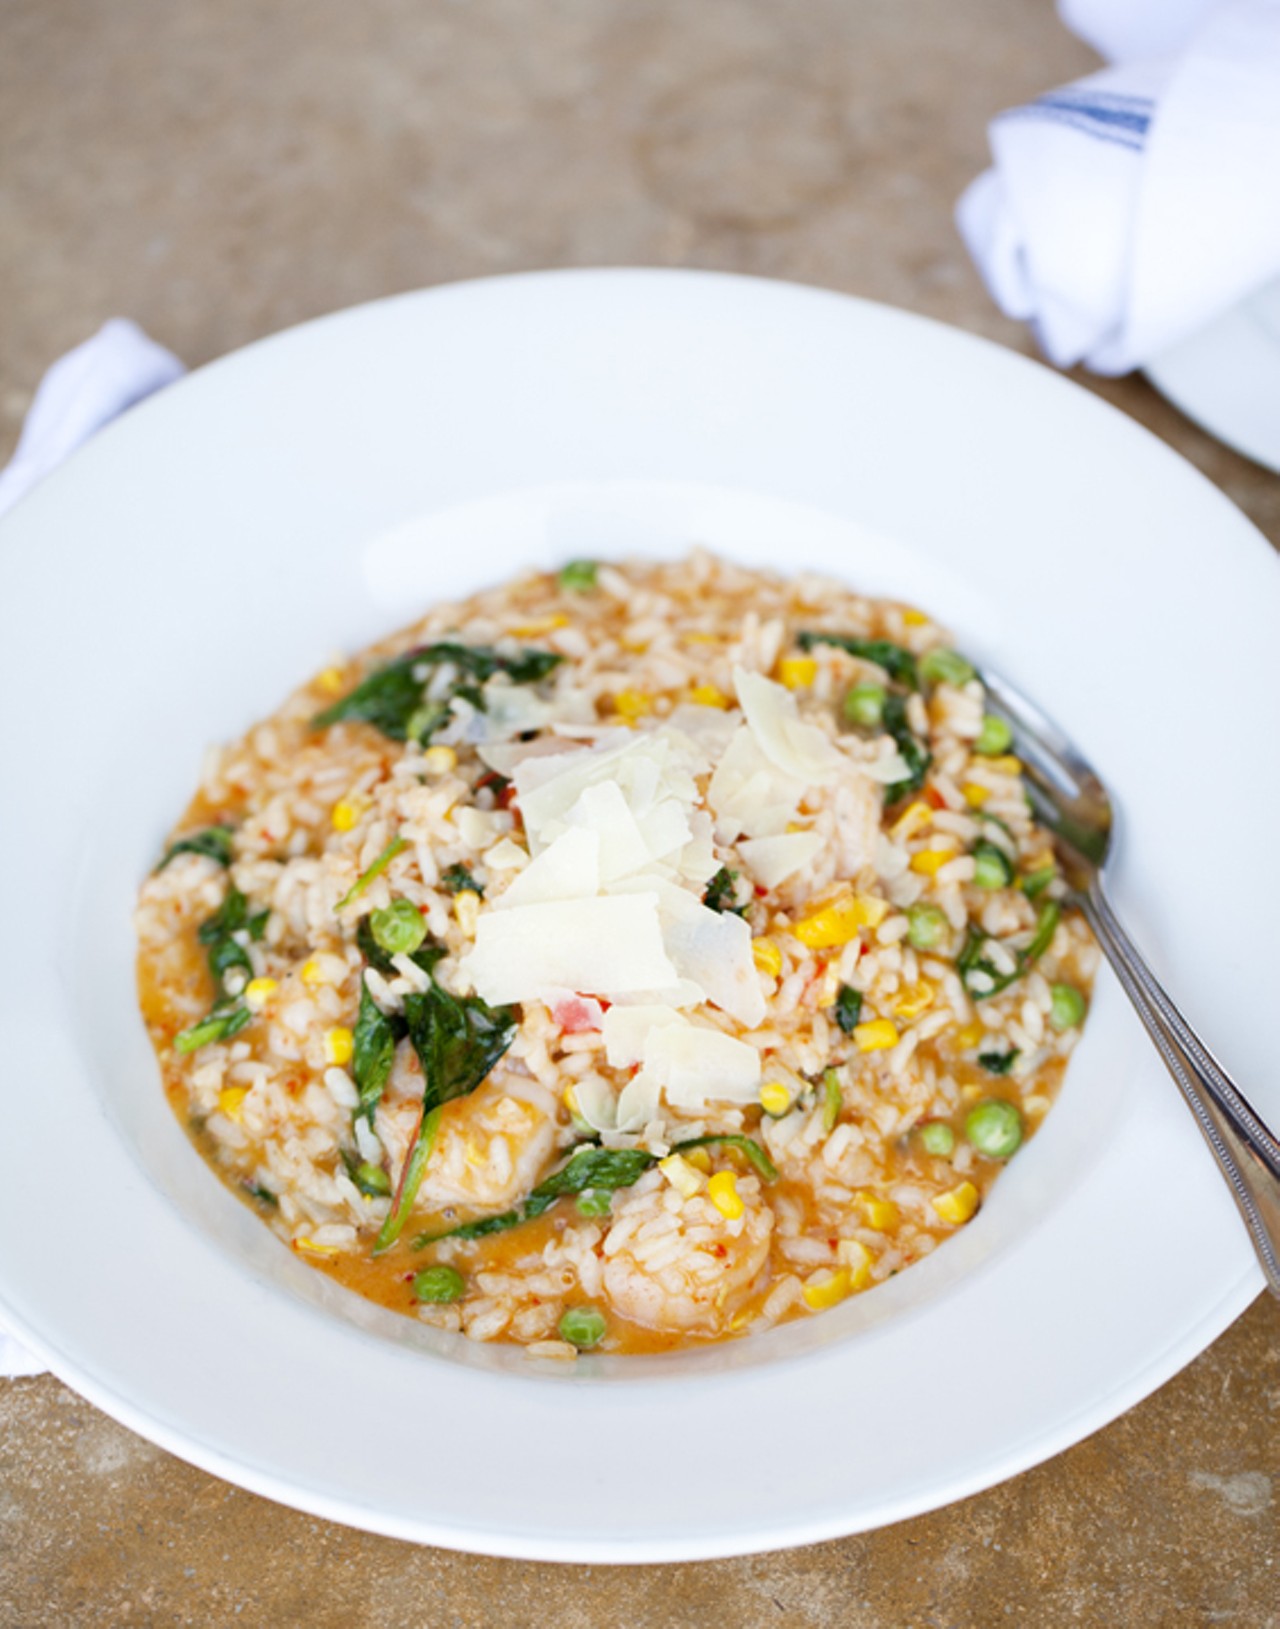 Risotto Del Giorno - the Risotto of the Day was a roasted Georgia corn, sweet red bell pepper puree, English Peas, baby arugula, shrimp, and shaved parmigiano risotto.